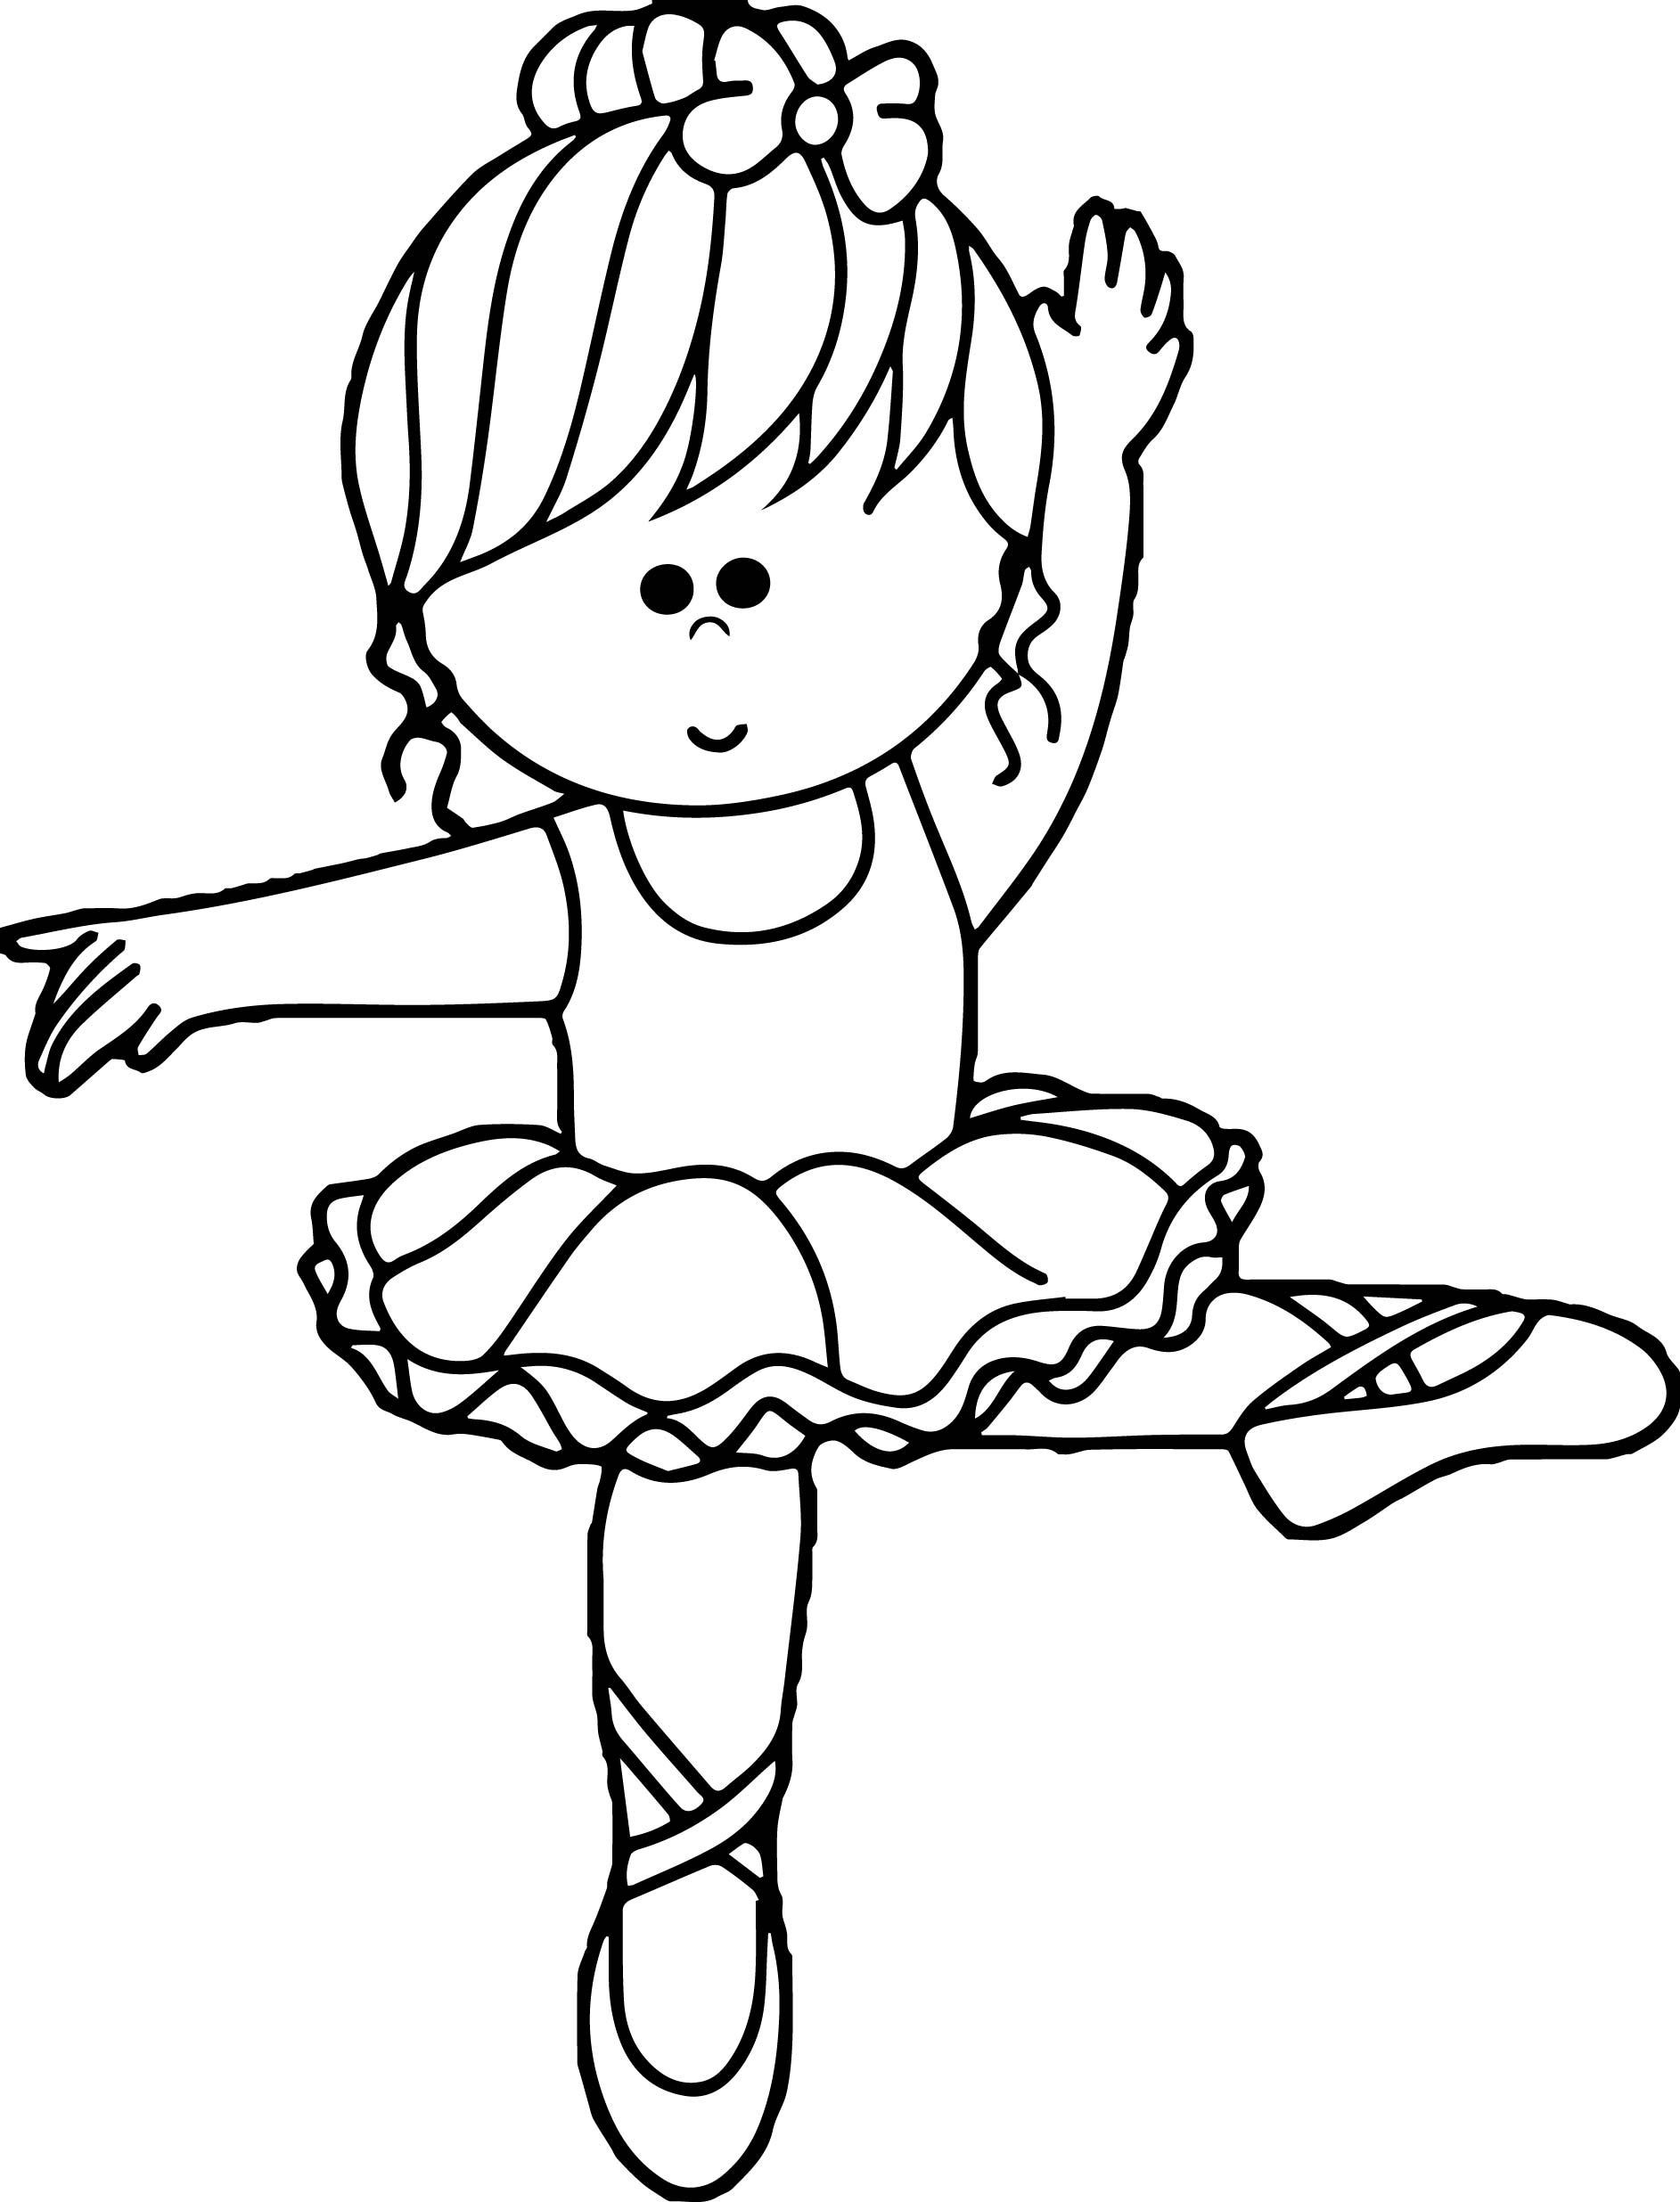 Coloring pages nutcracker coloring page new ballerina coloring pages